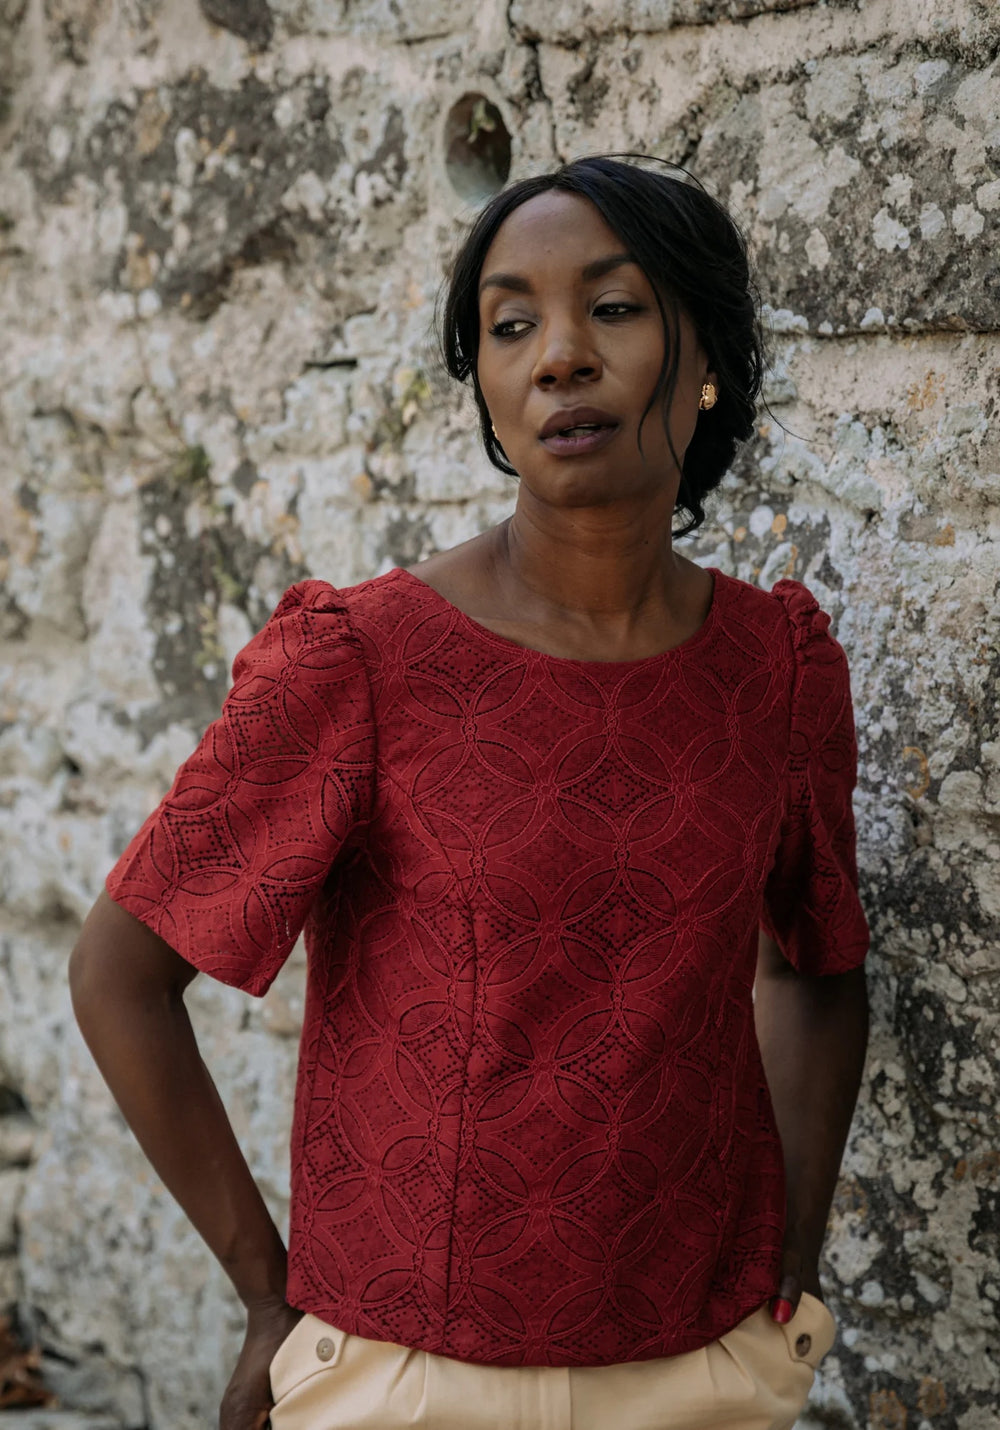 Woman wearing the Cicadella Blouse sewing pattern from Maison Fauve on The Fold Line. A blouse pattern made in viscose, soft jacquard, tencel, cotton, crepe, poplin, satin or twill fabrics, featuring princess seams, scooped neckline, short puff sleeves, f